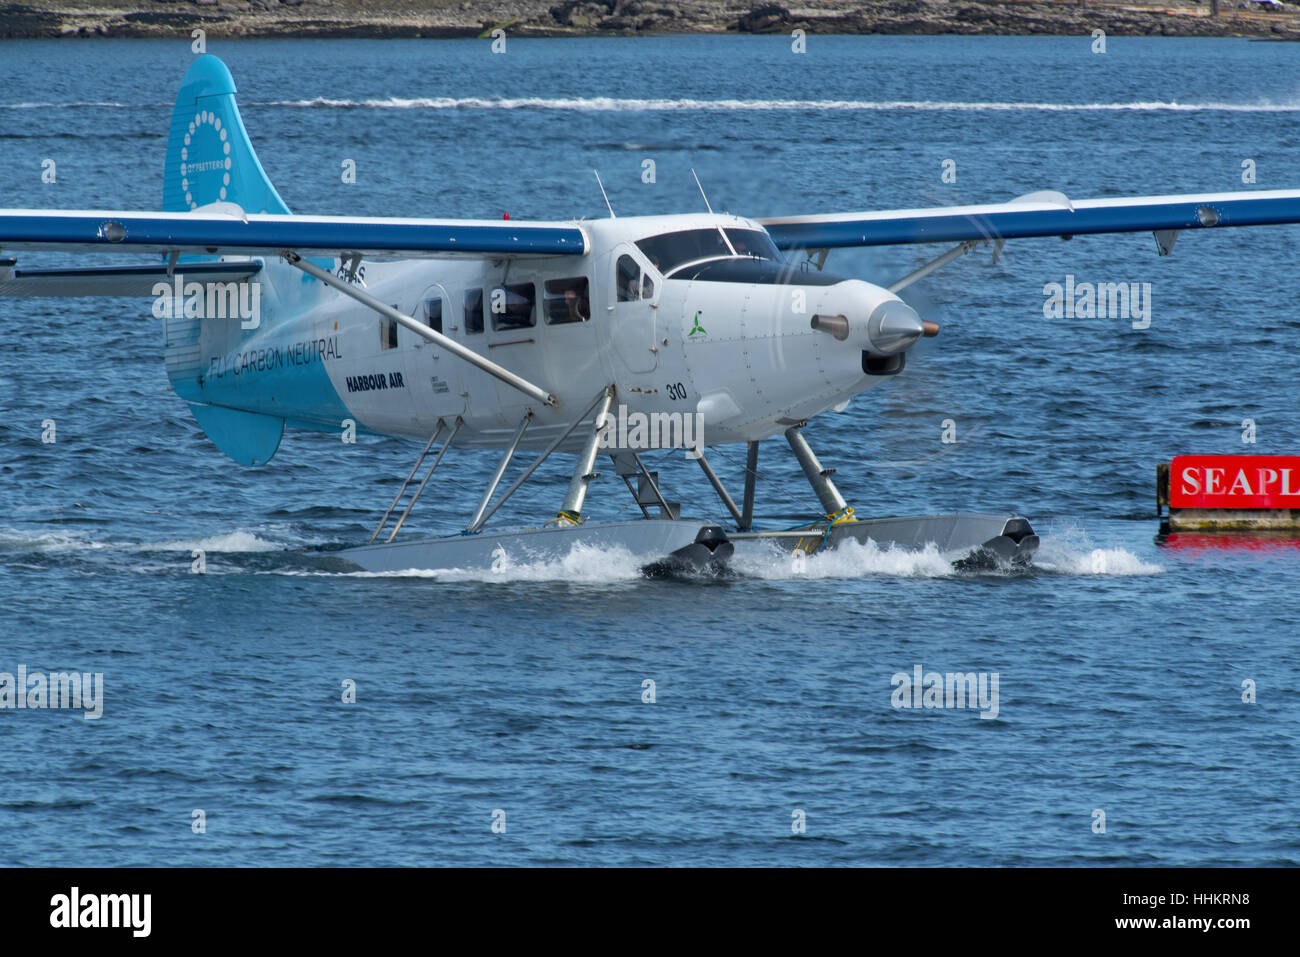 Harbour Air float plane approaching its berthing pontoon at Nanaimo, Vancouver Island, BC Canada. SCO 11,686. Stock Photo